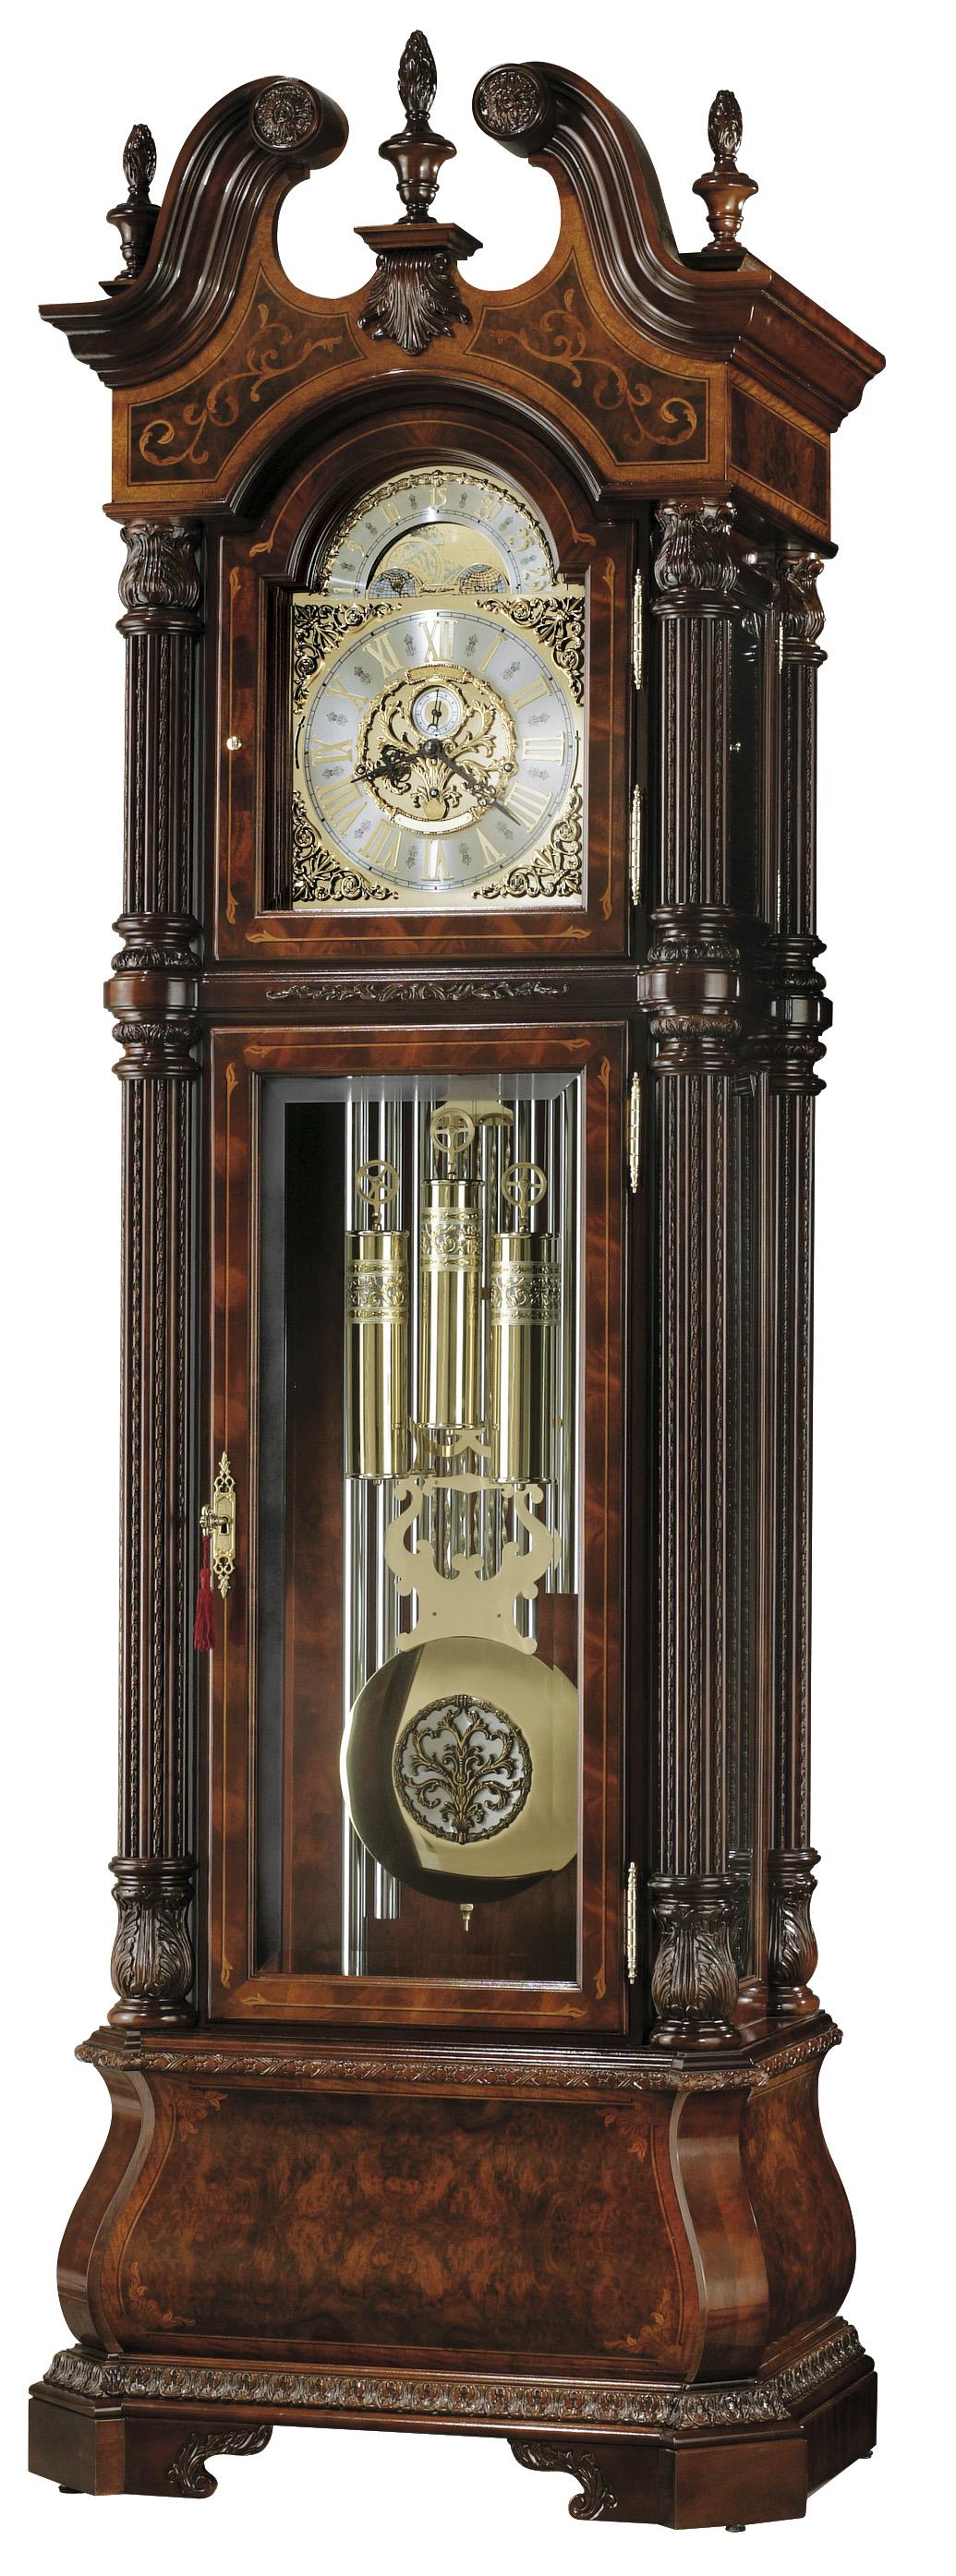 J.H. Miller II Grandfather Clock with Three Carved Finials